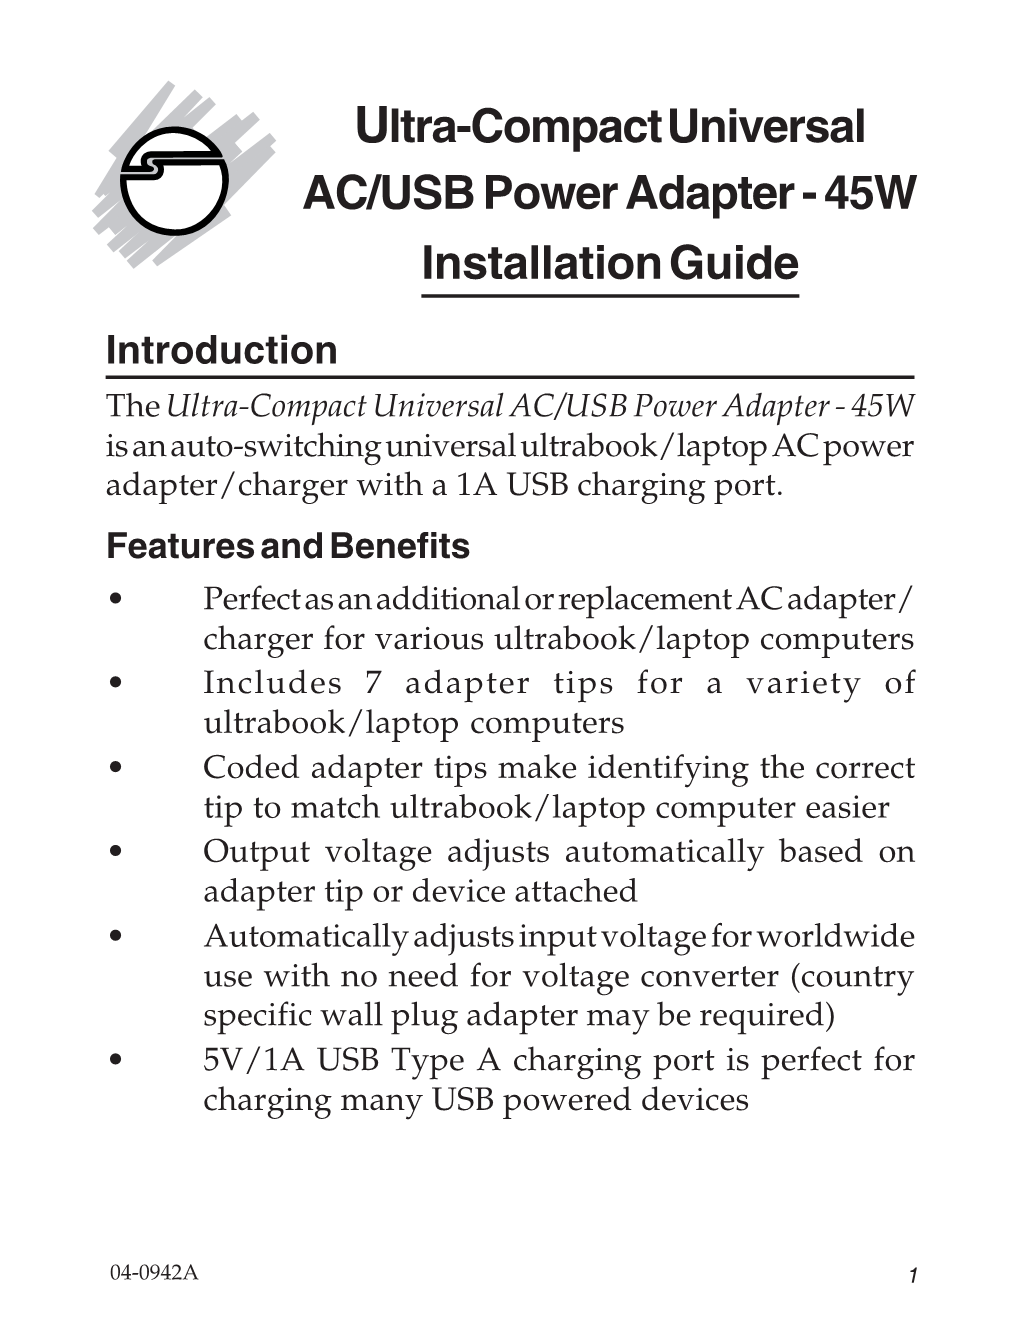 Ultra-Compact Universal AC/USB Power Adapter - 45W Installation Guide